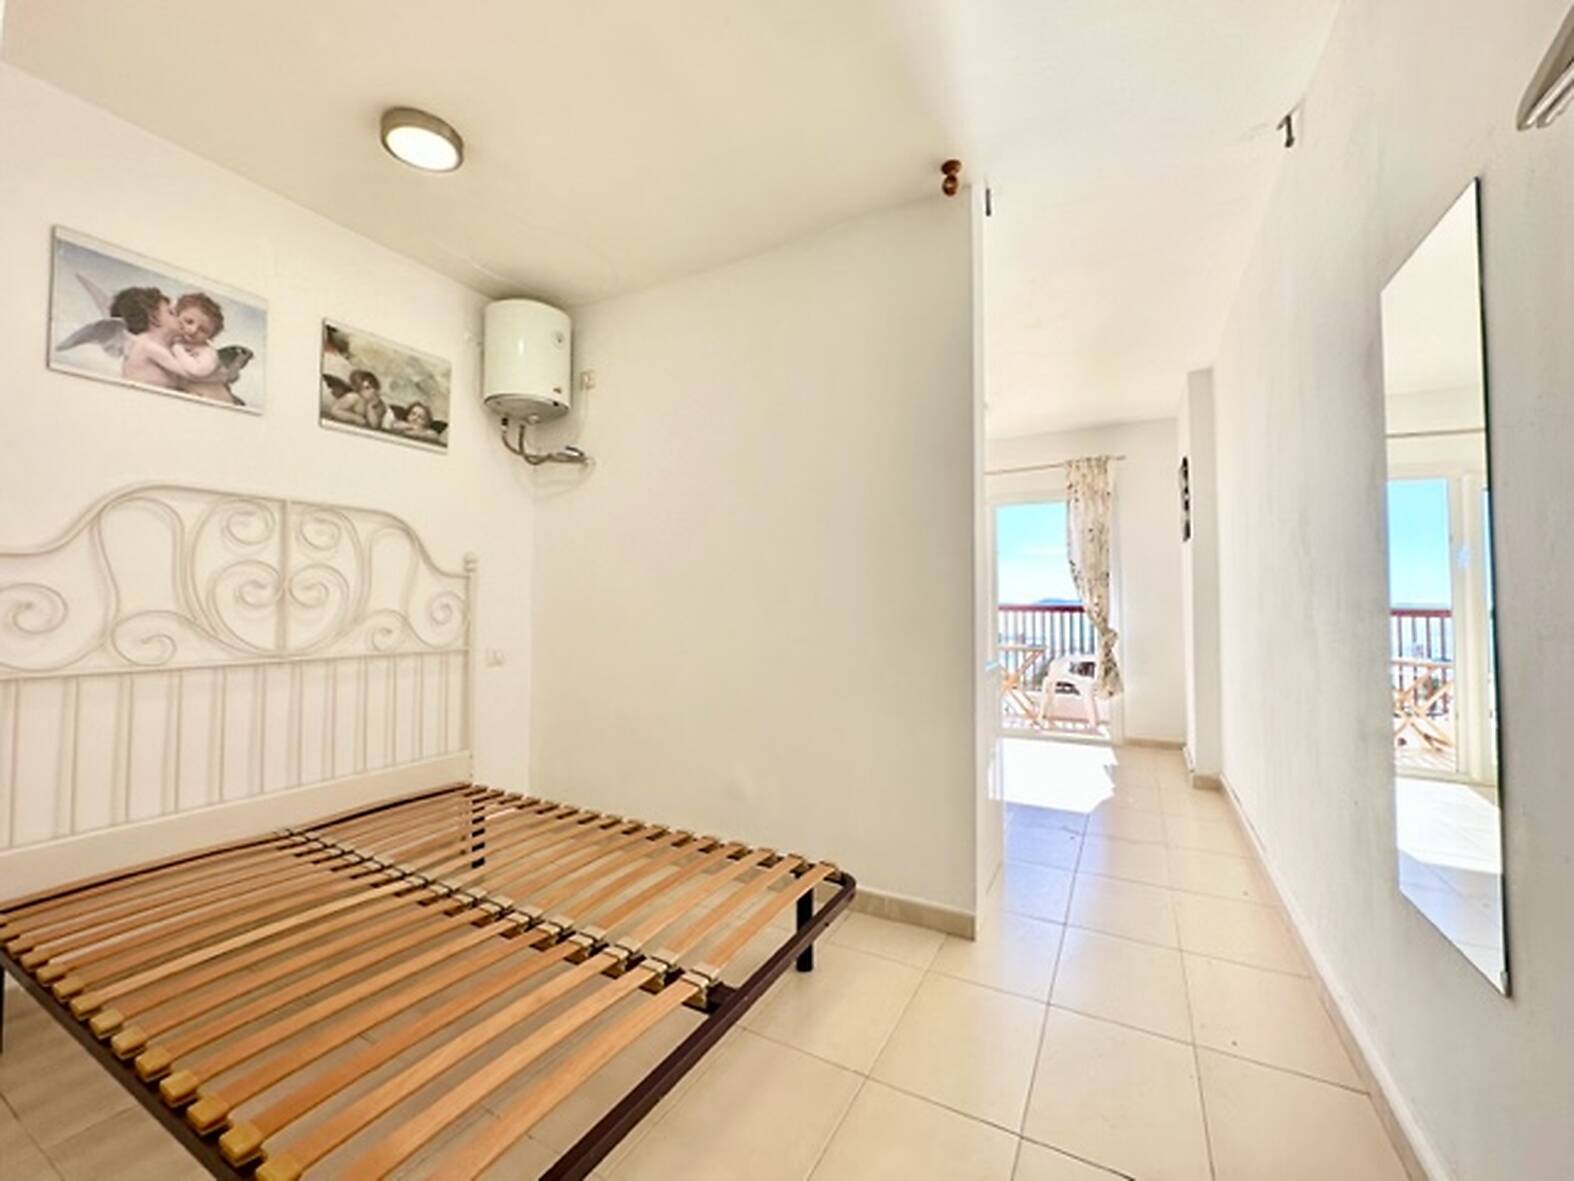 Studio on the seafront, for sale in Empuriabrava